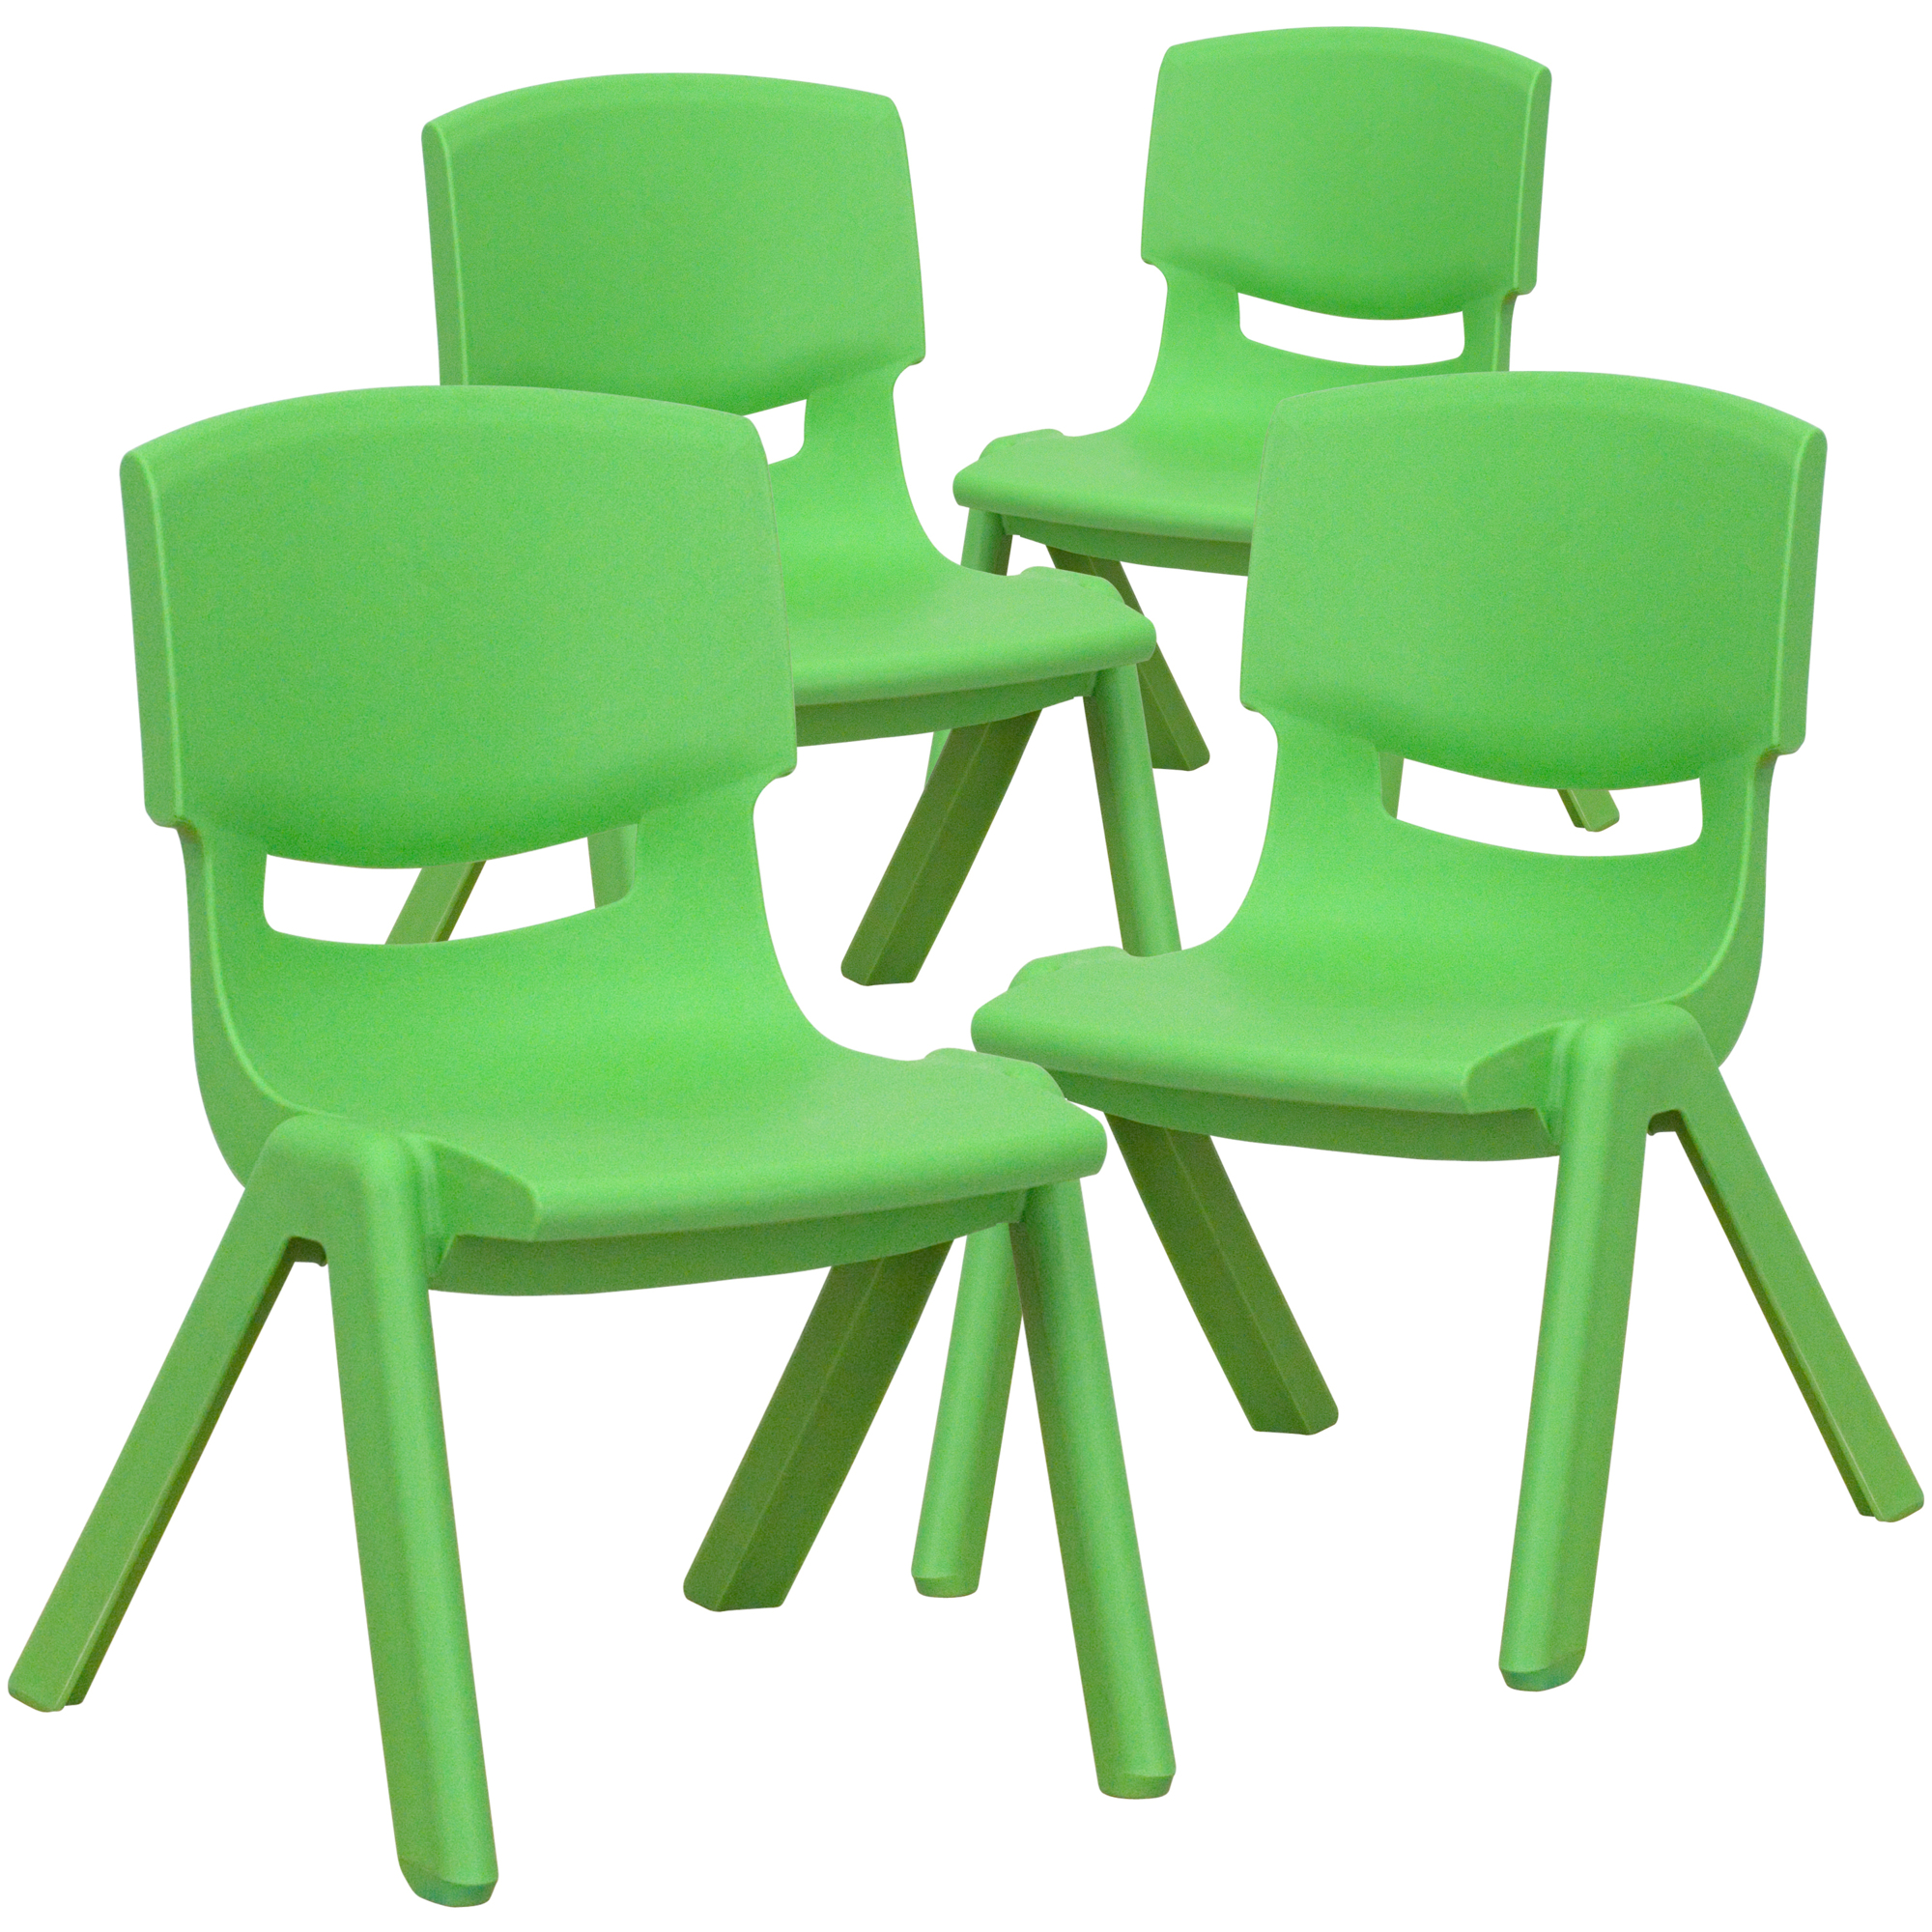 Flash Furniture, 4 Pack Green Plastic School Chair-10.5Inch H Seat, Primary Color Green, Included (qty.) 4, Model 4YUYCX4003GREEN